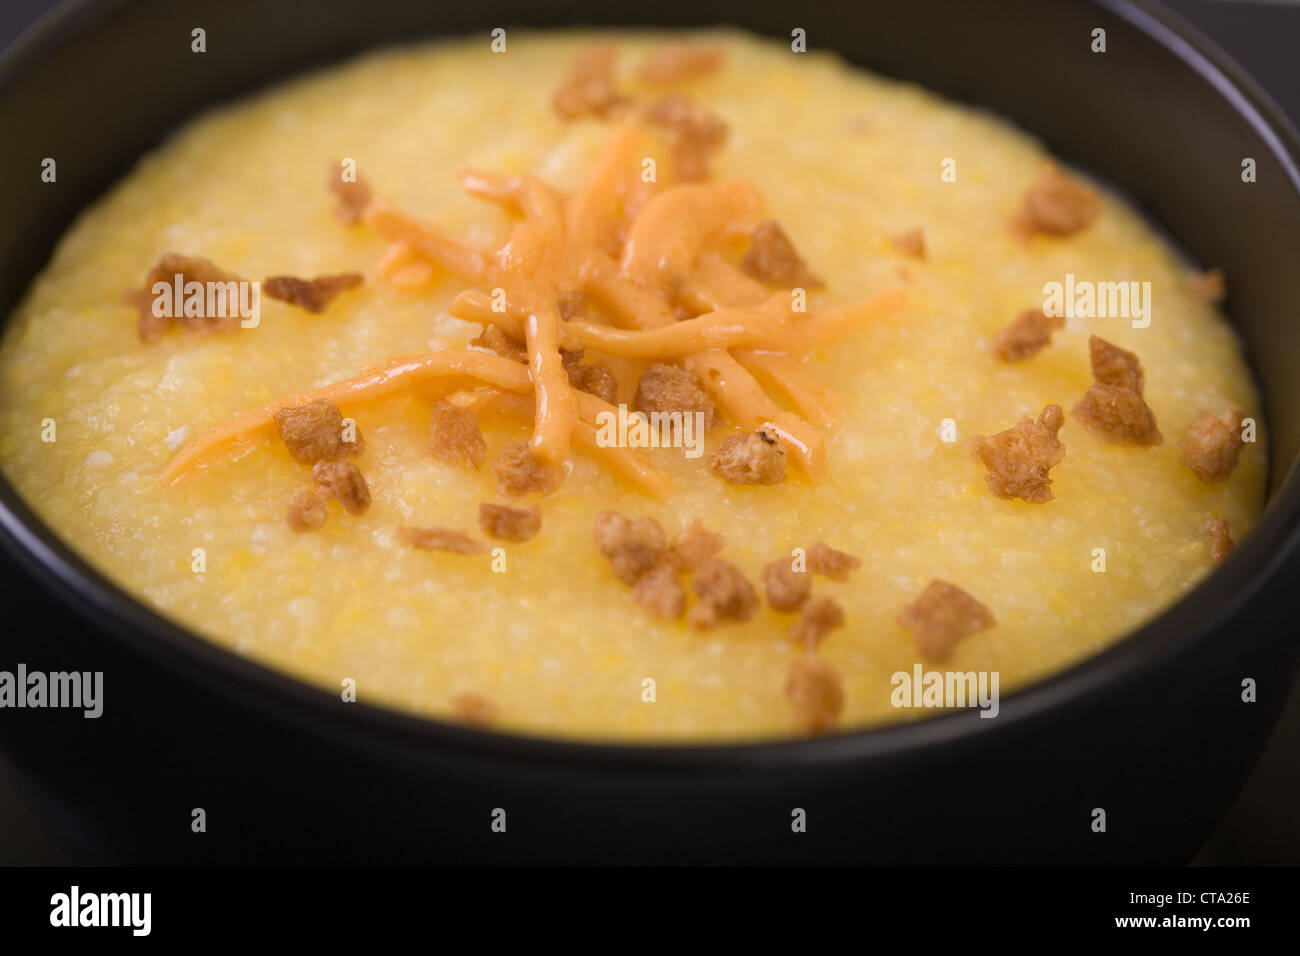 Vegan Grits with Soy Cheese and Textured Vegetable Protein Stock Photo